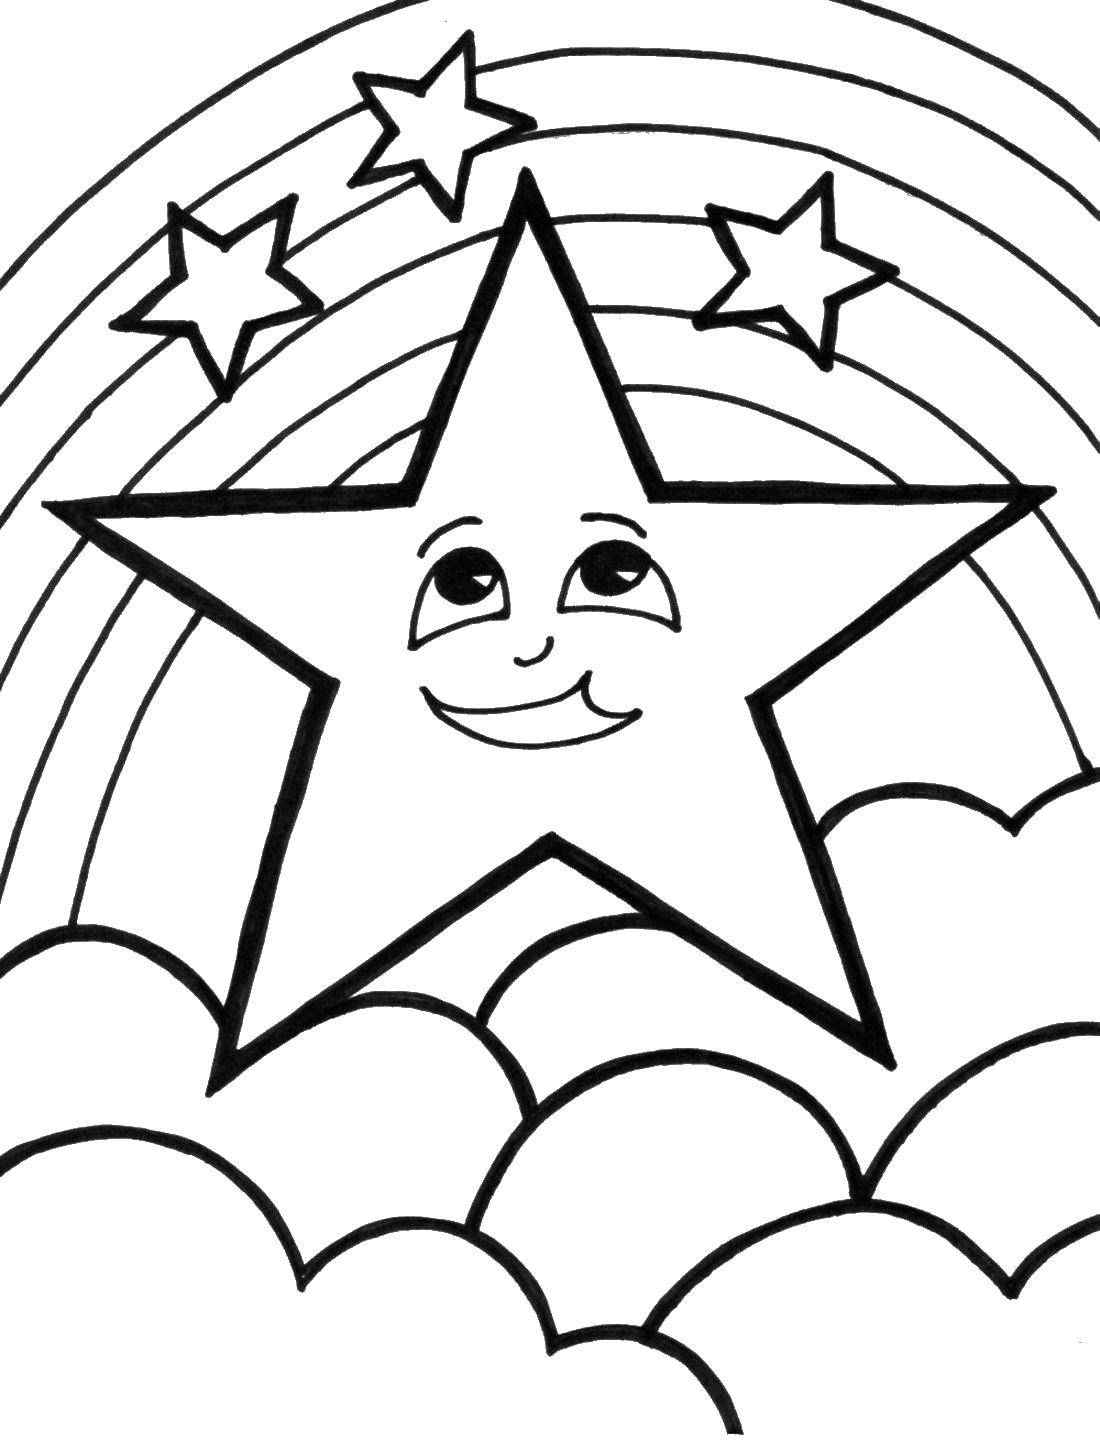 Coloring Star above the clouds. Category moon. Tags:  clouds, star, smile.